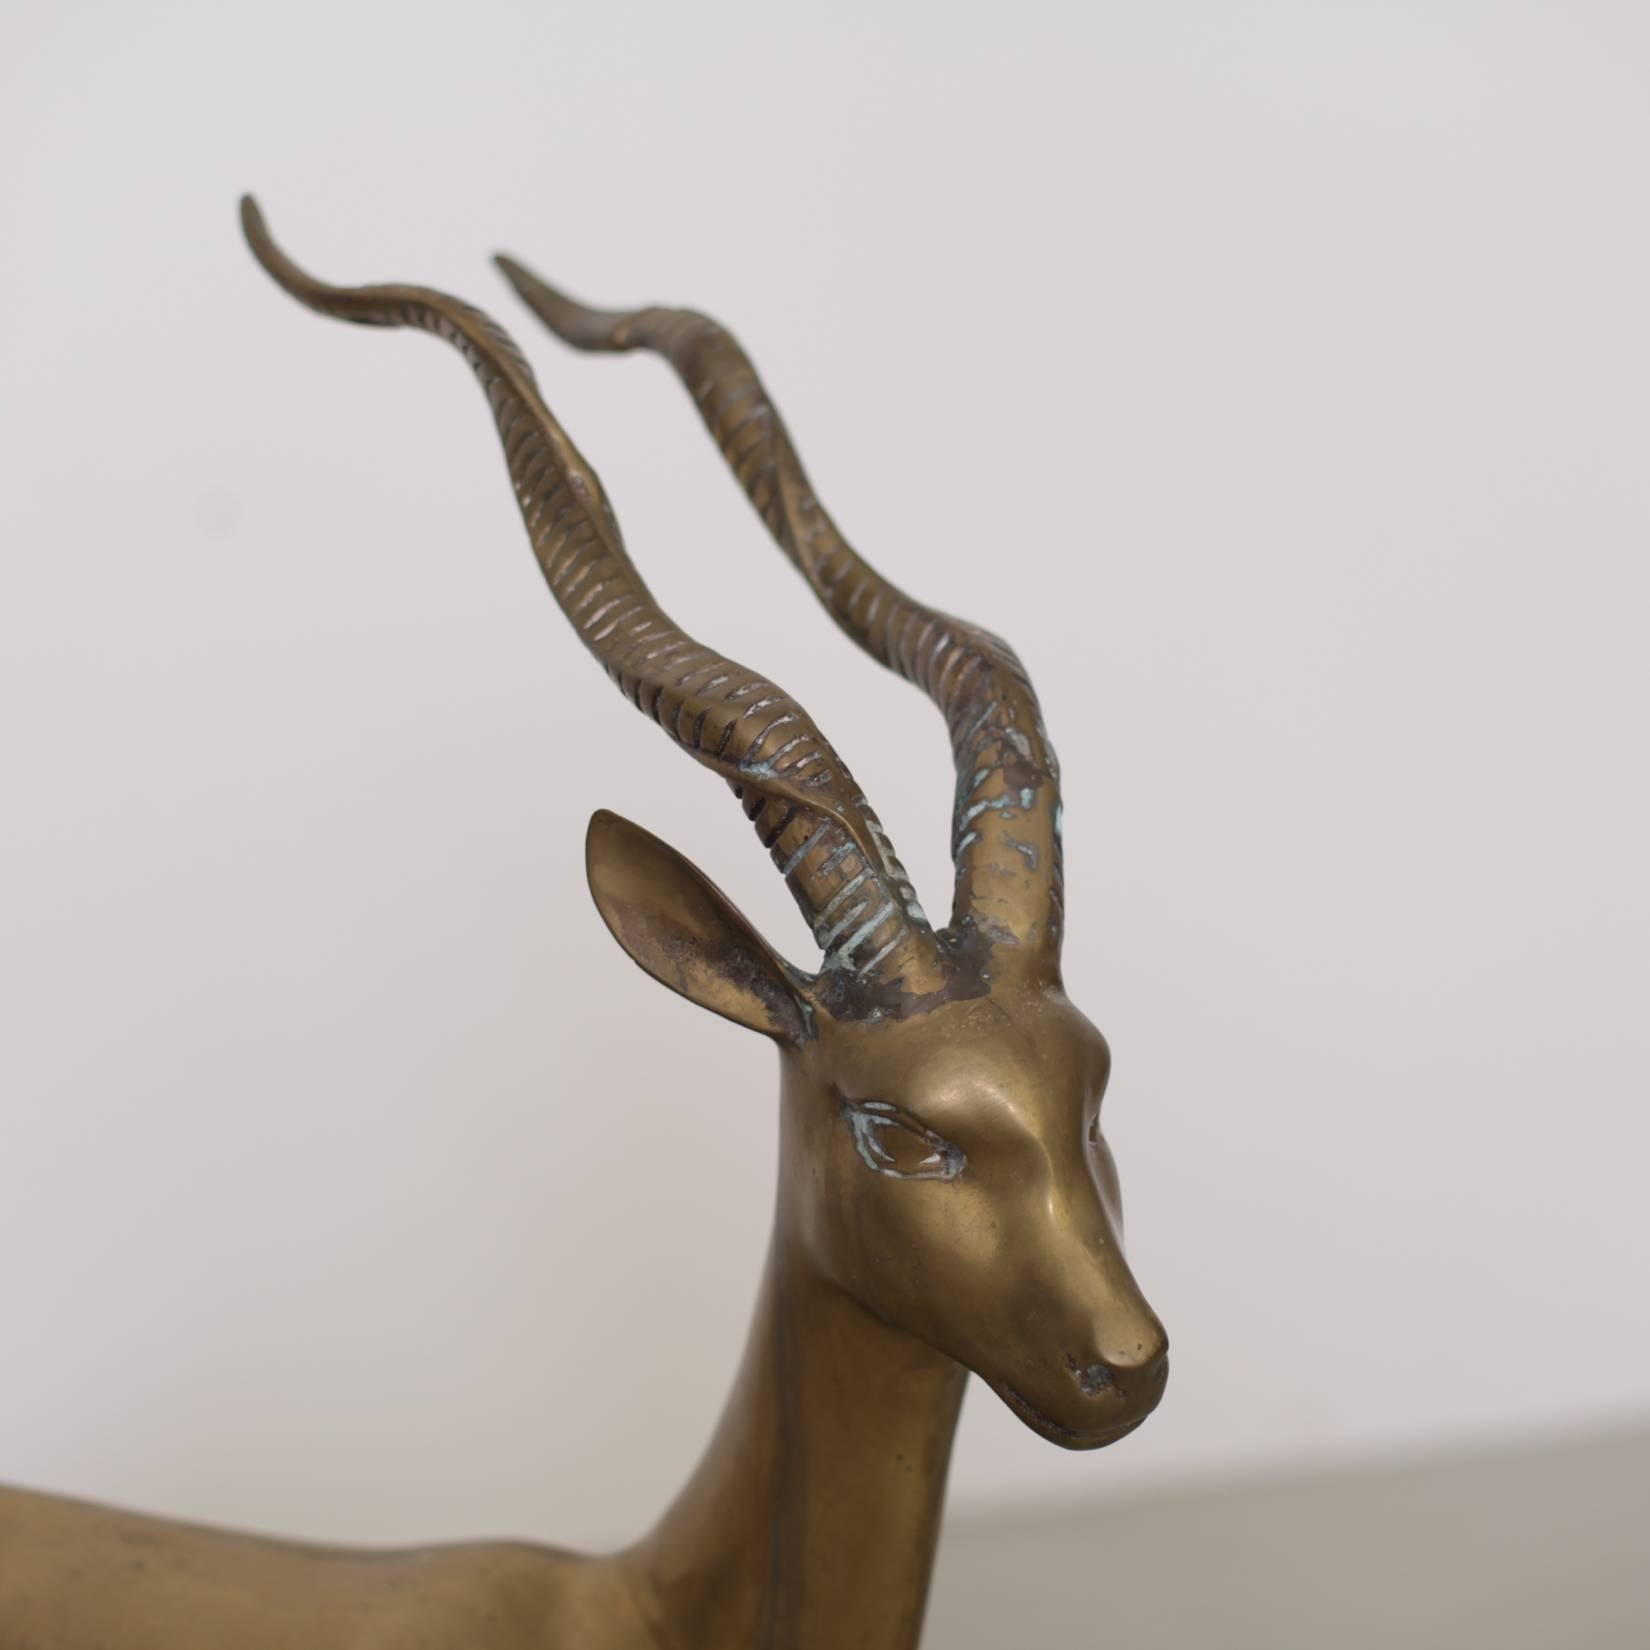 Extraordinary huge ibex or deer made of brass. It´s in very good condition and it brings the Hollywood regency glamour in every room. Perfect christmas decoration.

